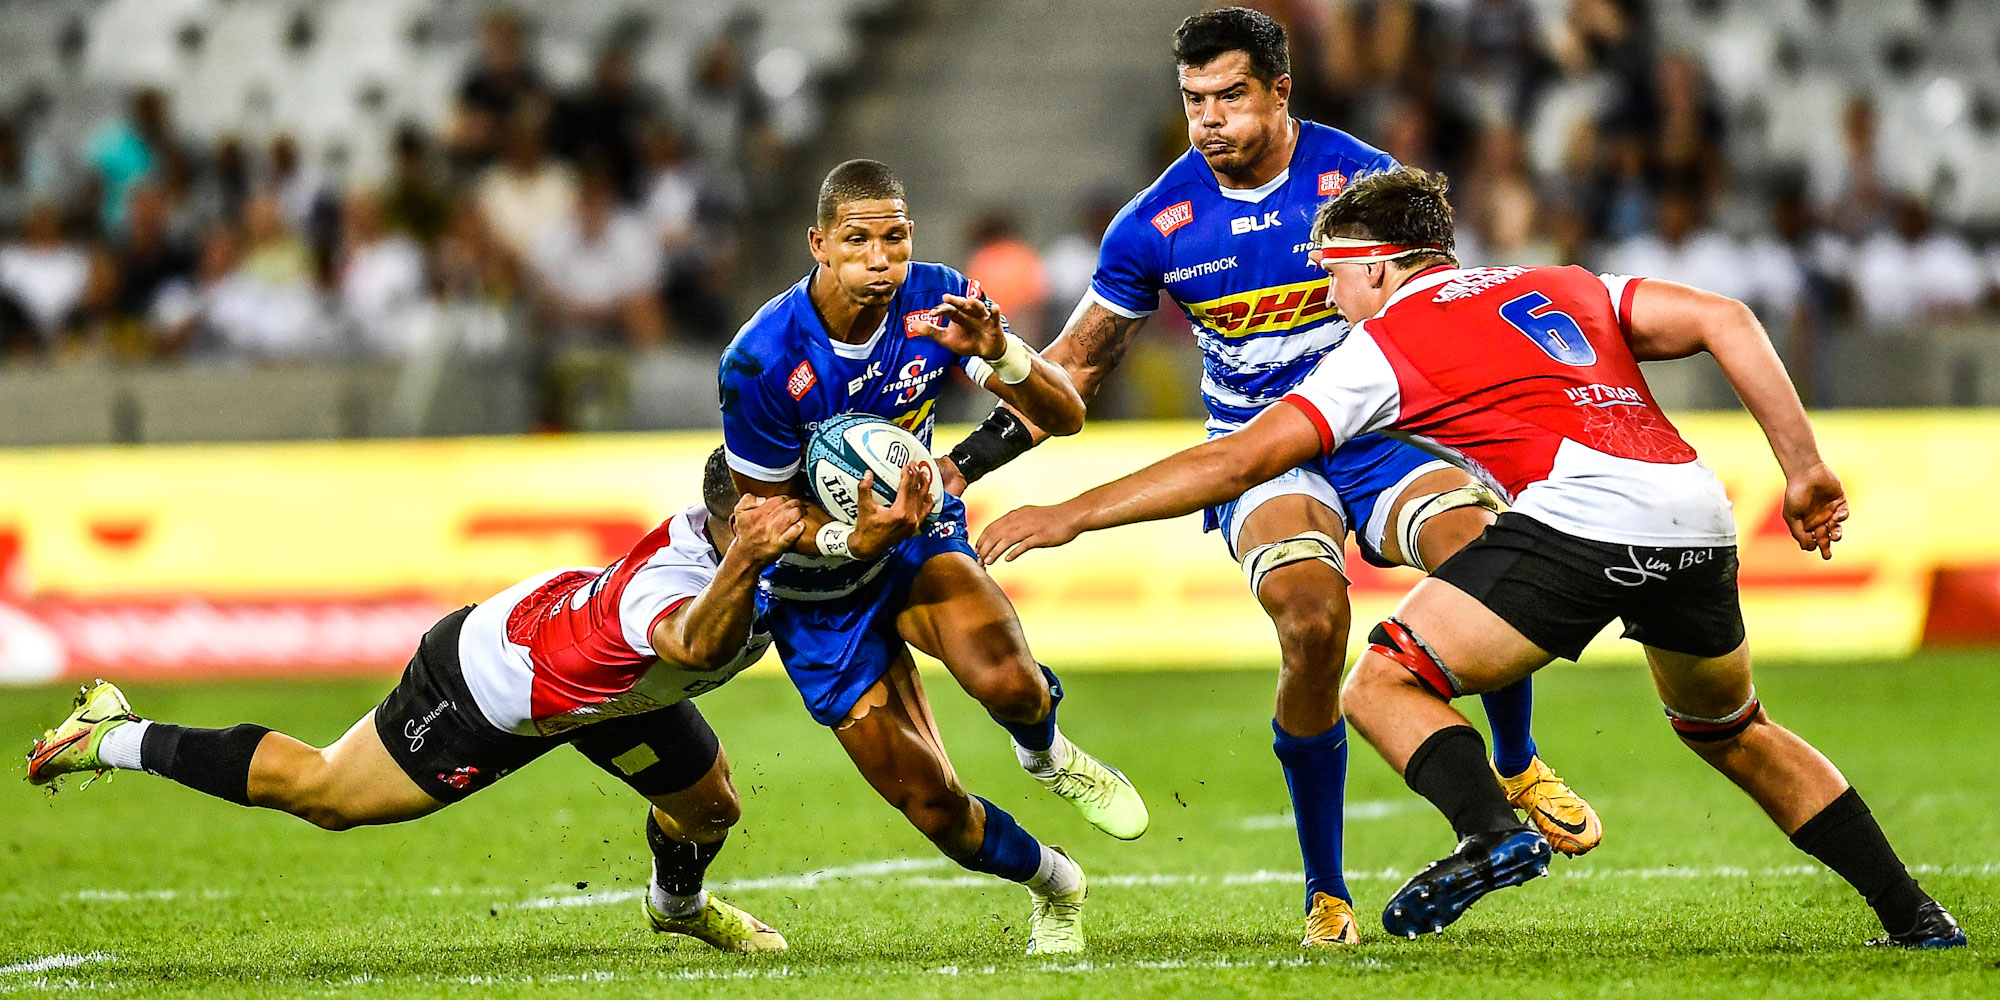 Manie Libbok on the attack earlier this year when the DHL Stormers faced the Emirates Lions.